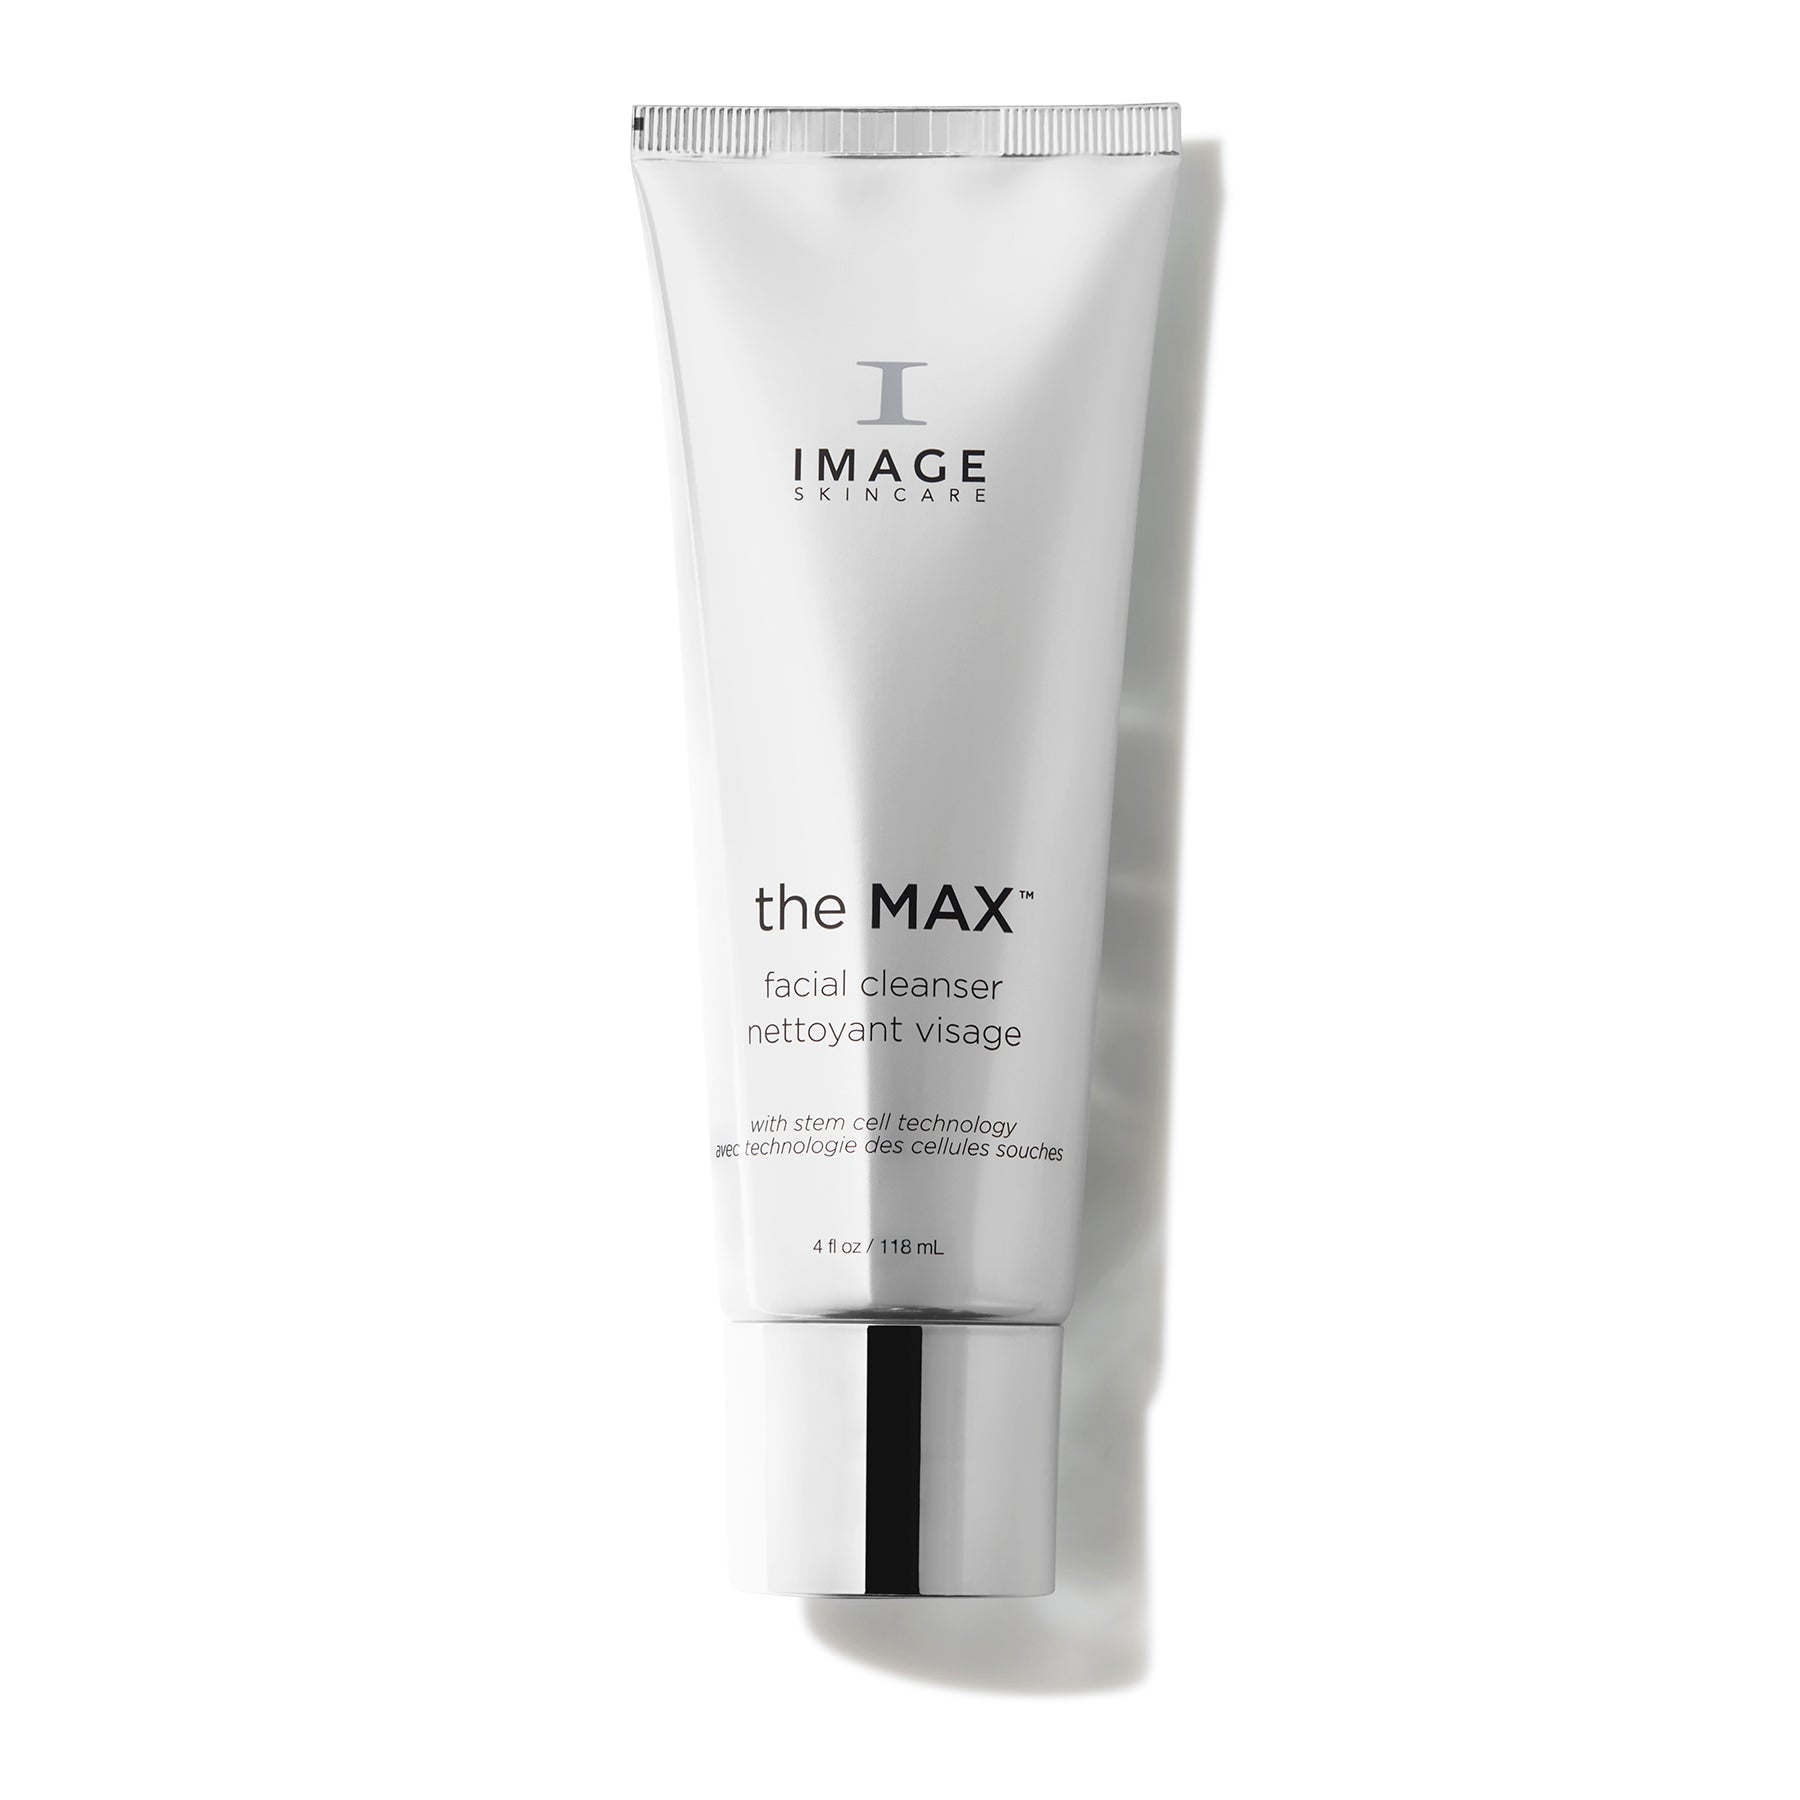 Image Skincare The Max Facial Cleanser Shop At Exclusive Beauty